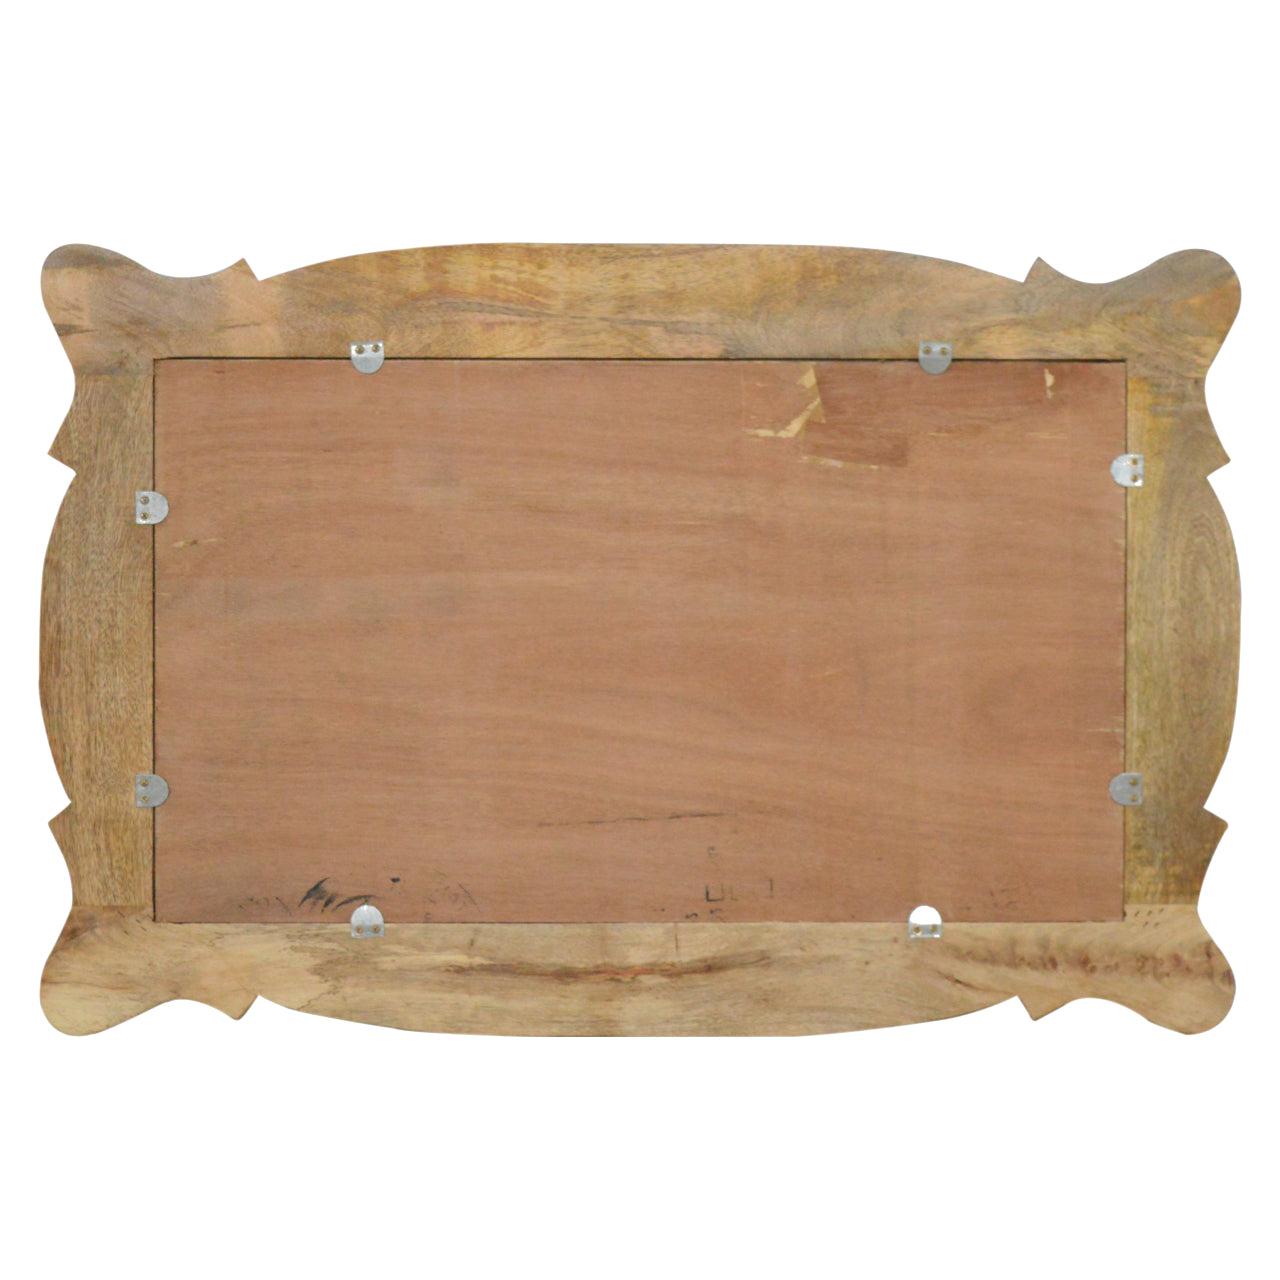 Wooden Hand Carved Oblong Frame with Mirror - mancavesuperstore